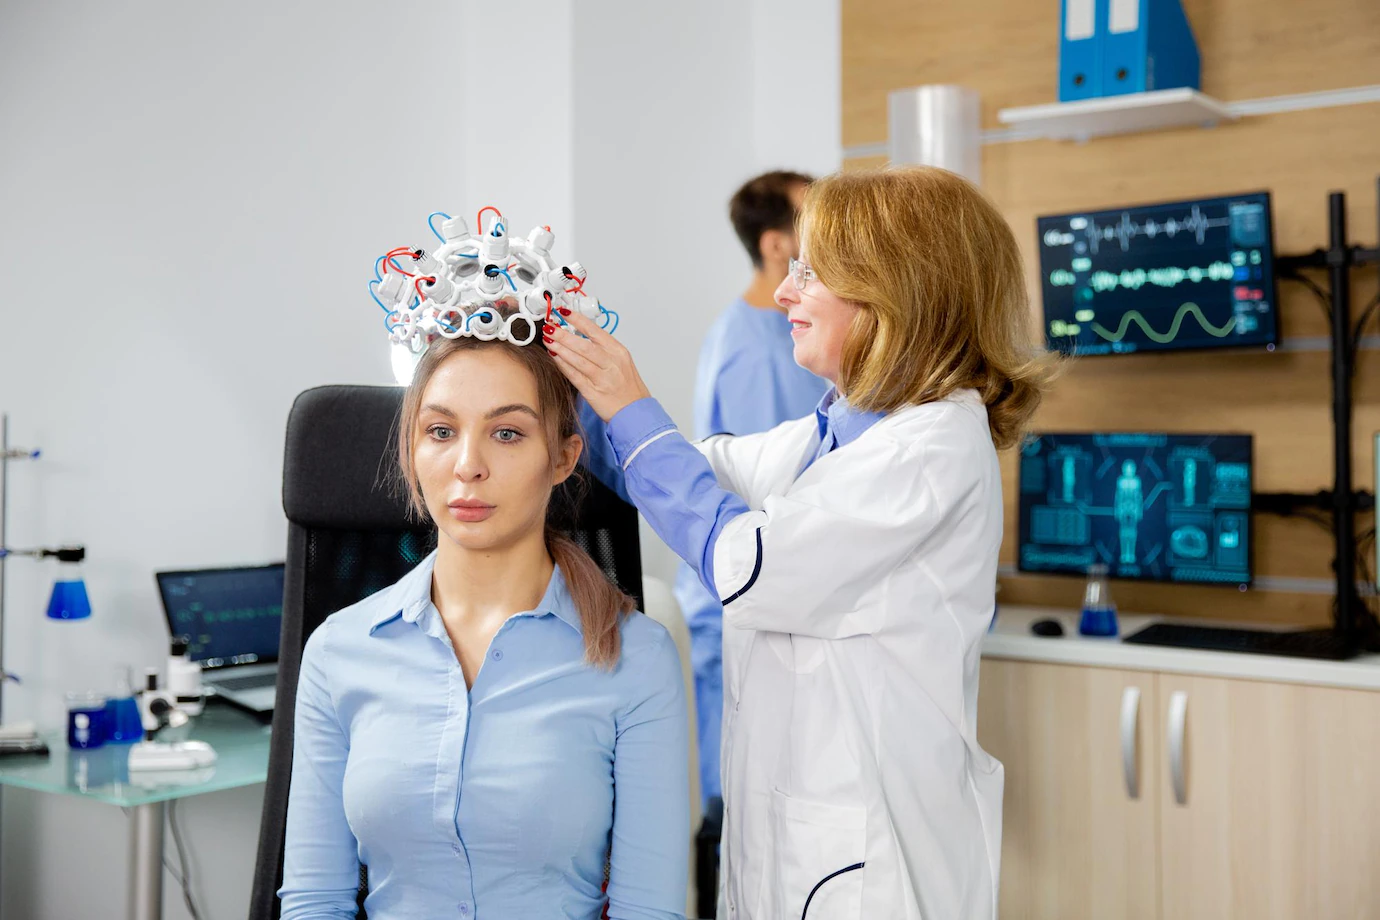 Female Scientist Who Puts Brain Waves Scanning Device Female Patient Clinical Study Brain Activity 482257 31607